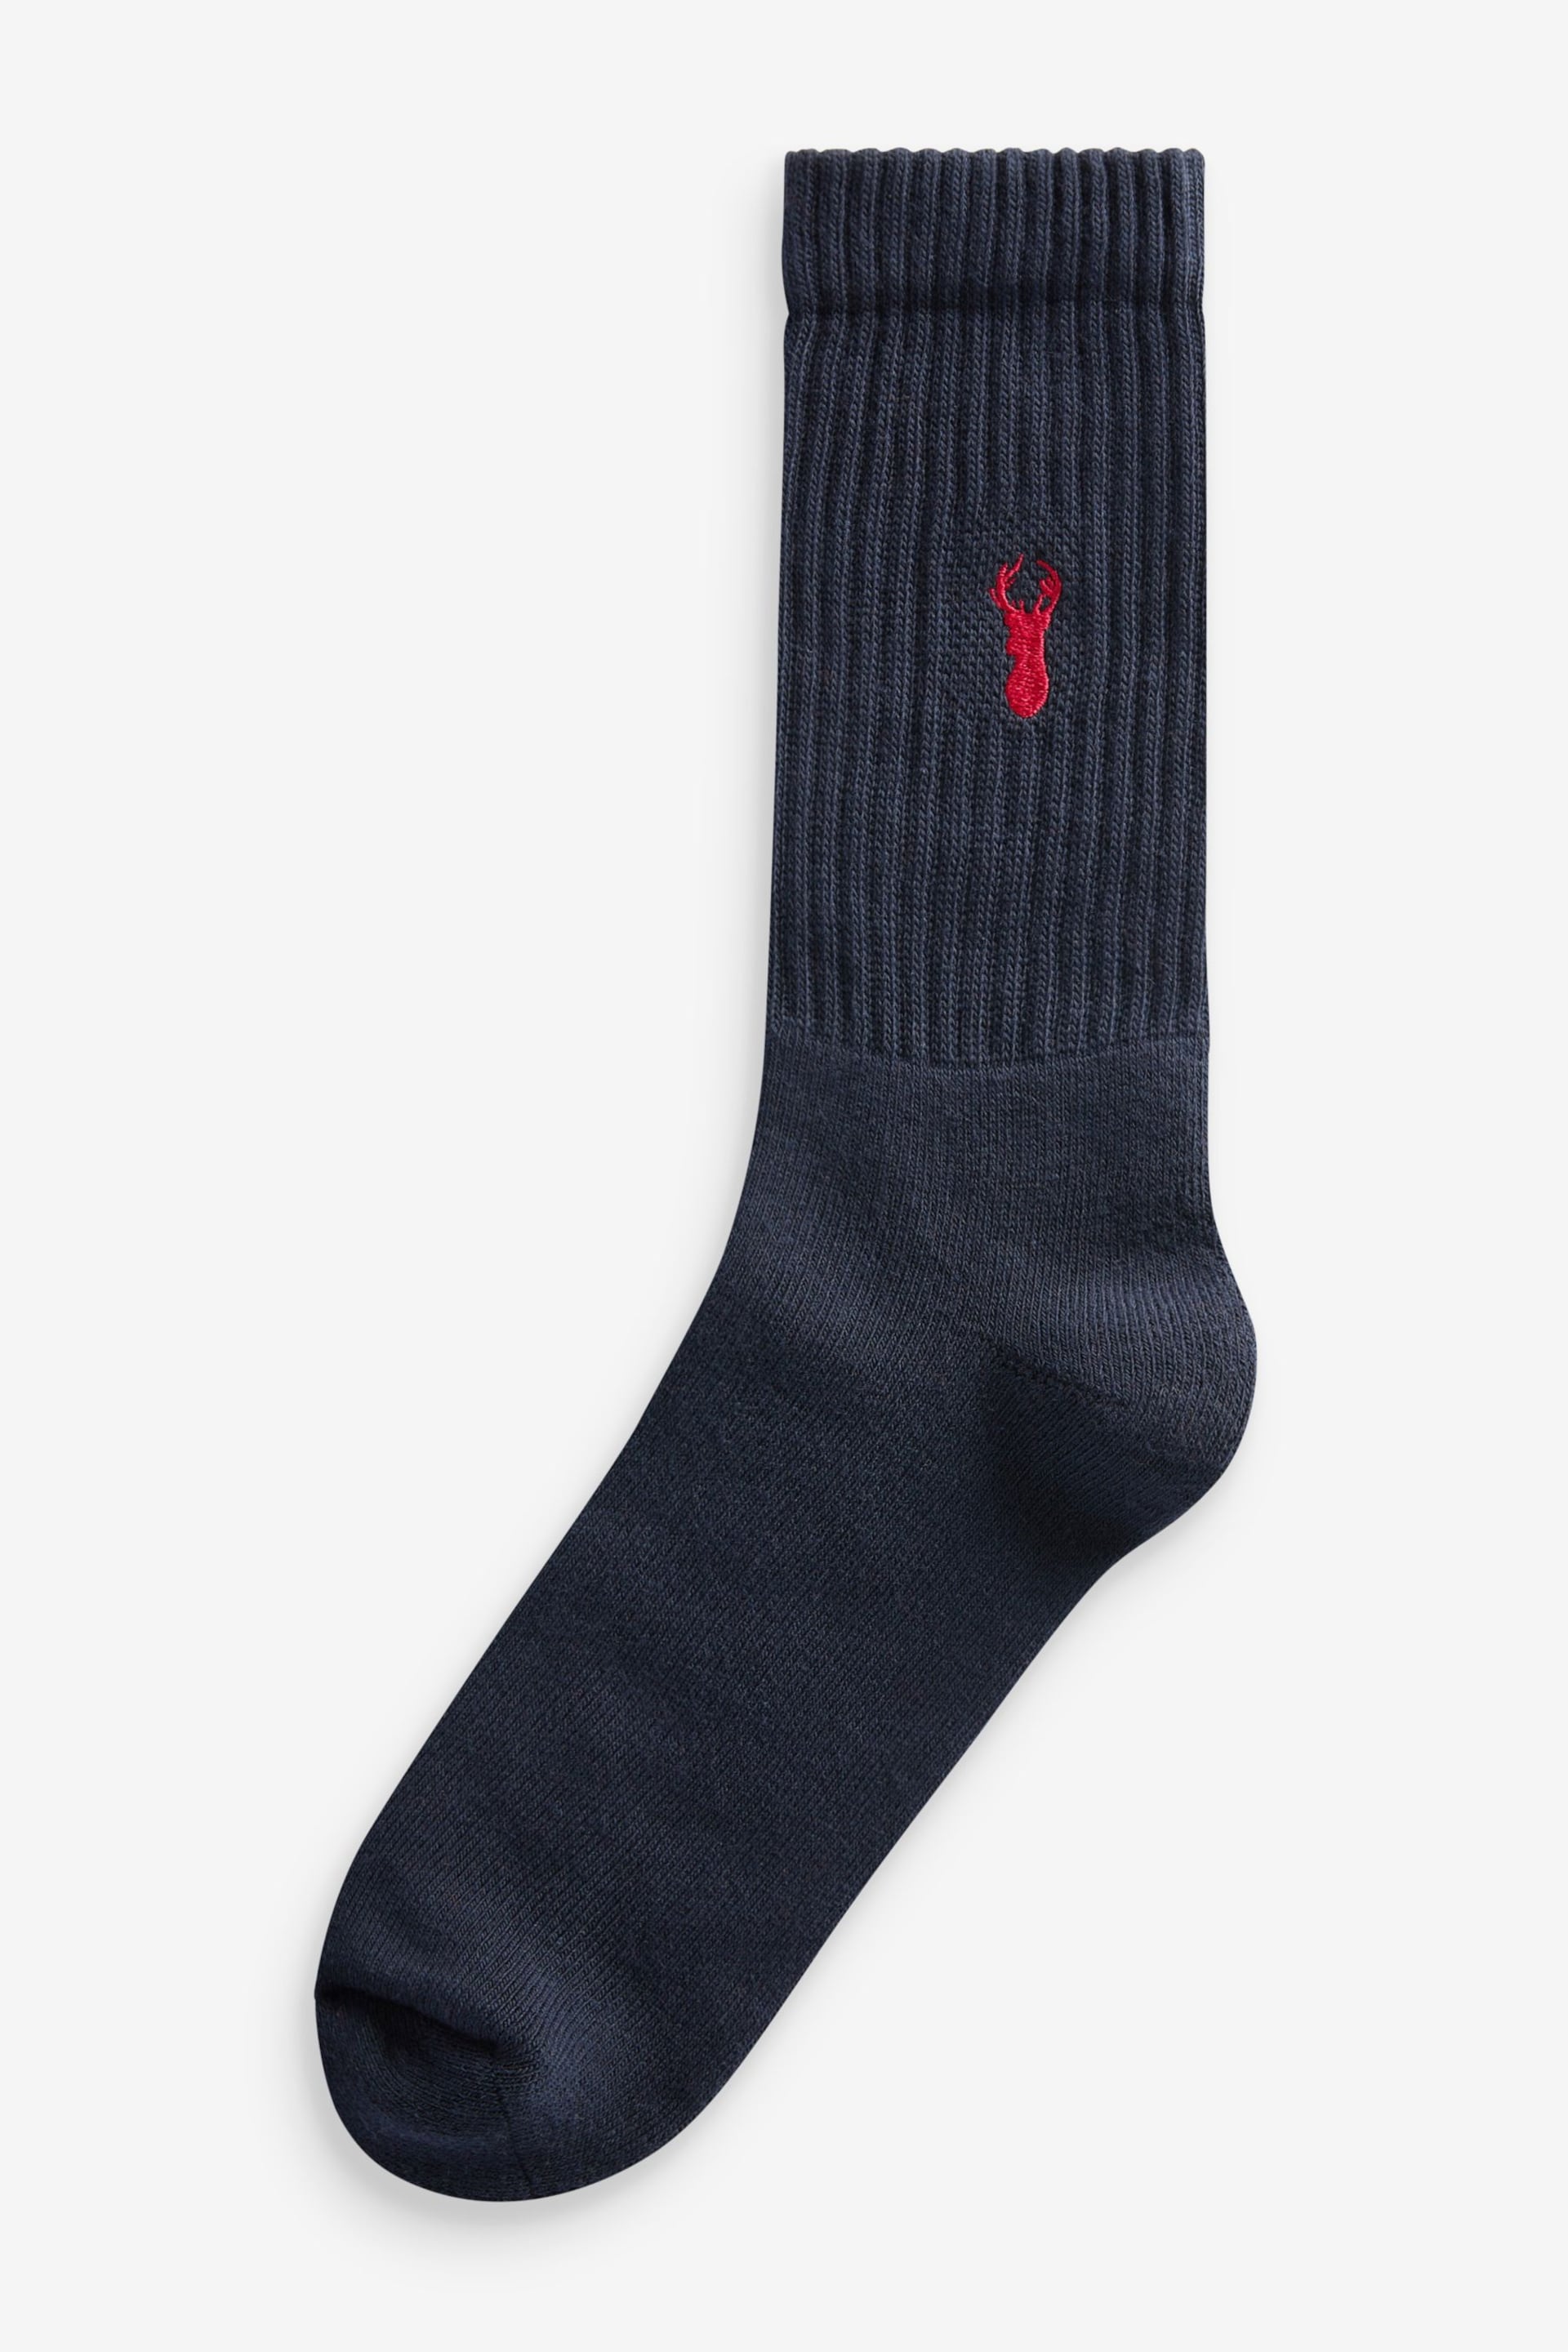 Rich 10 Pack Heavyweight Socks - Image 10 of 13